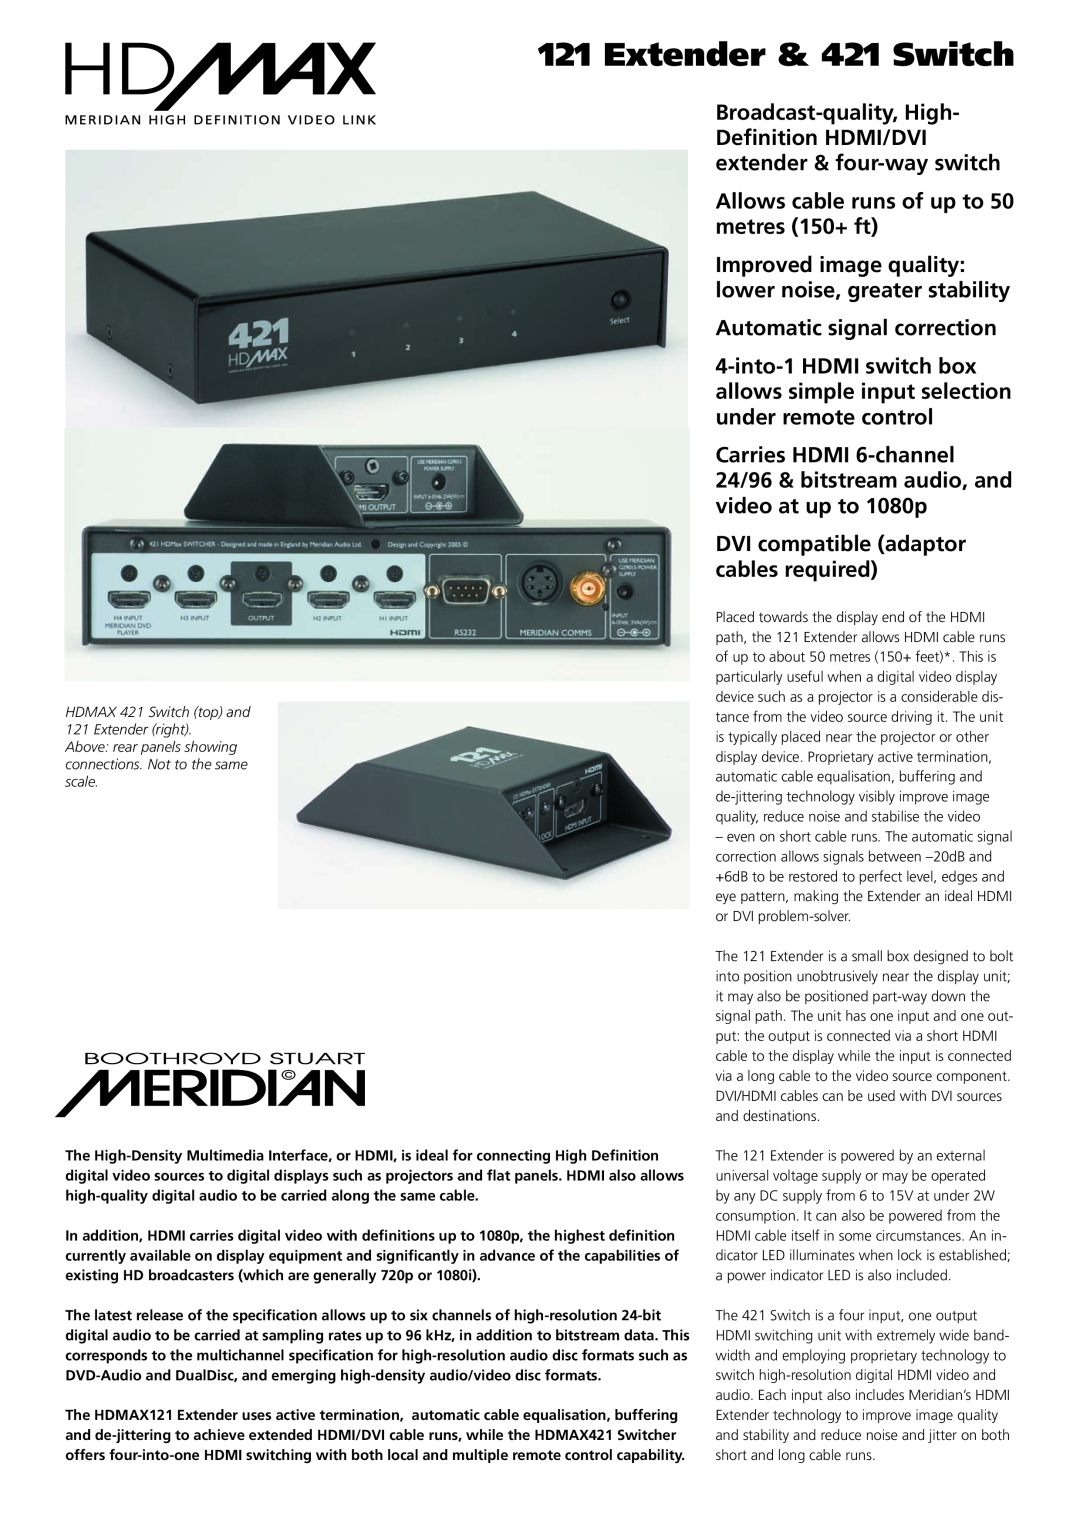 Meridian Audio manual Extender & 421 Switch, Allows cable runs of up to 50 metres 150+ ft, Automatic signal correction 